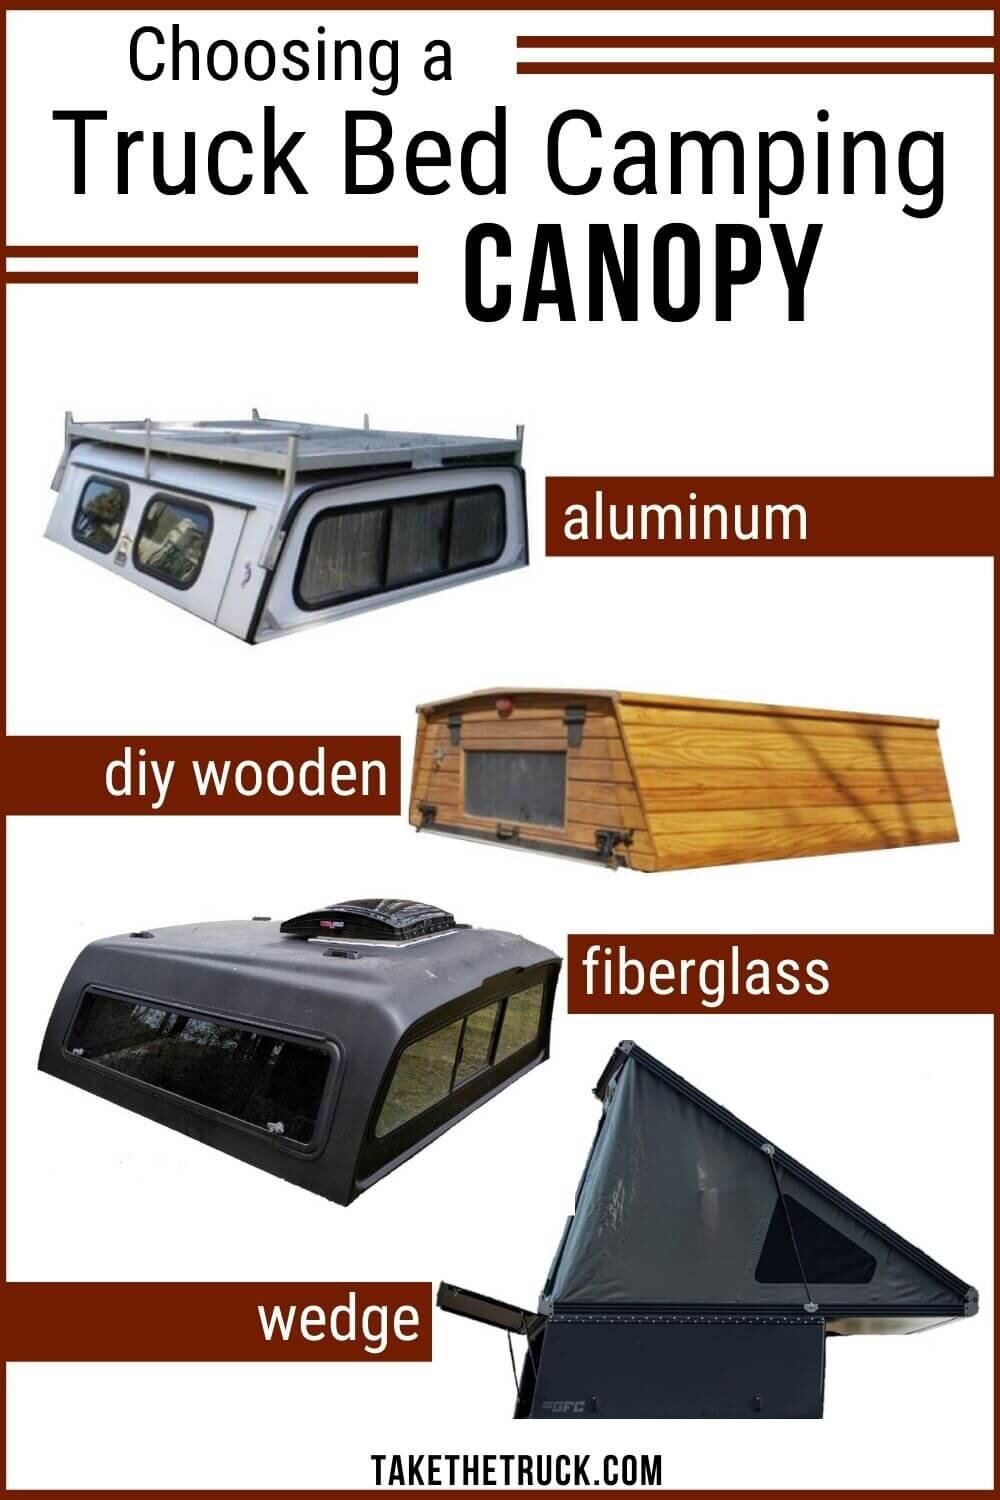 If you’re thinking about a DIY truck bed camper, you’ll need a truck camping canopy or truck cap. This post gives pros and cons of types of truck shells for camping to help you choose!